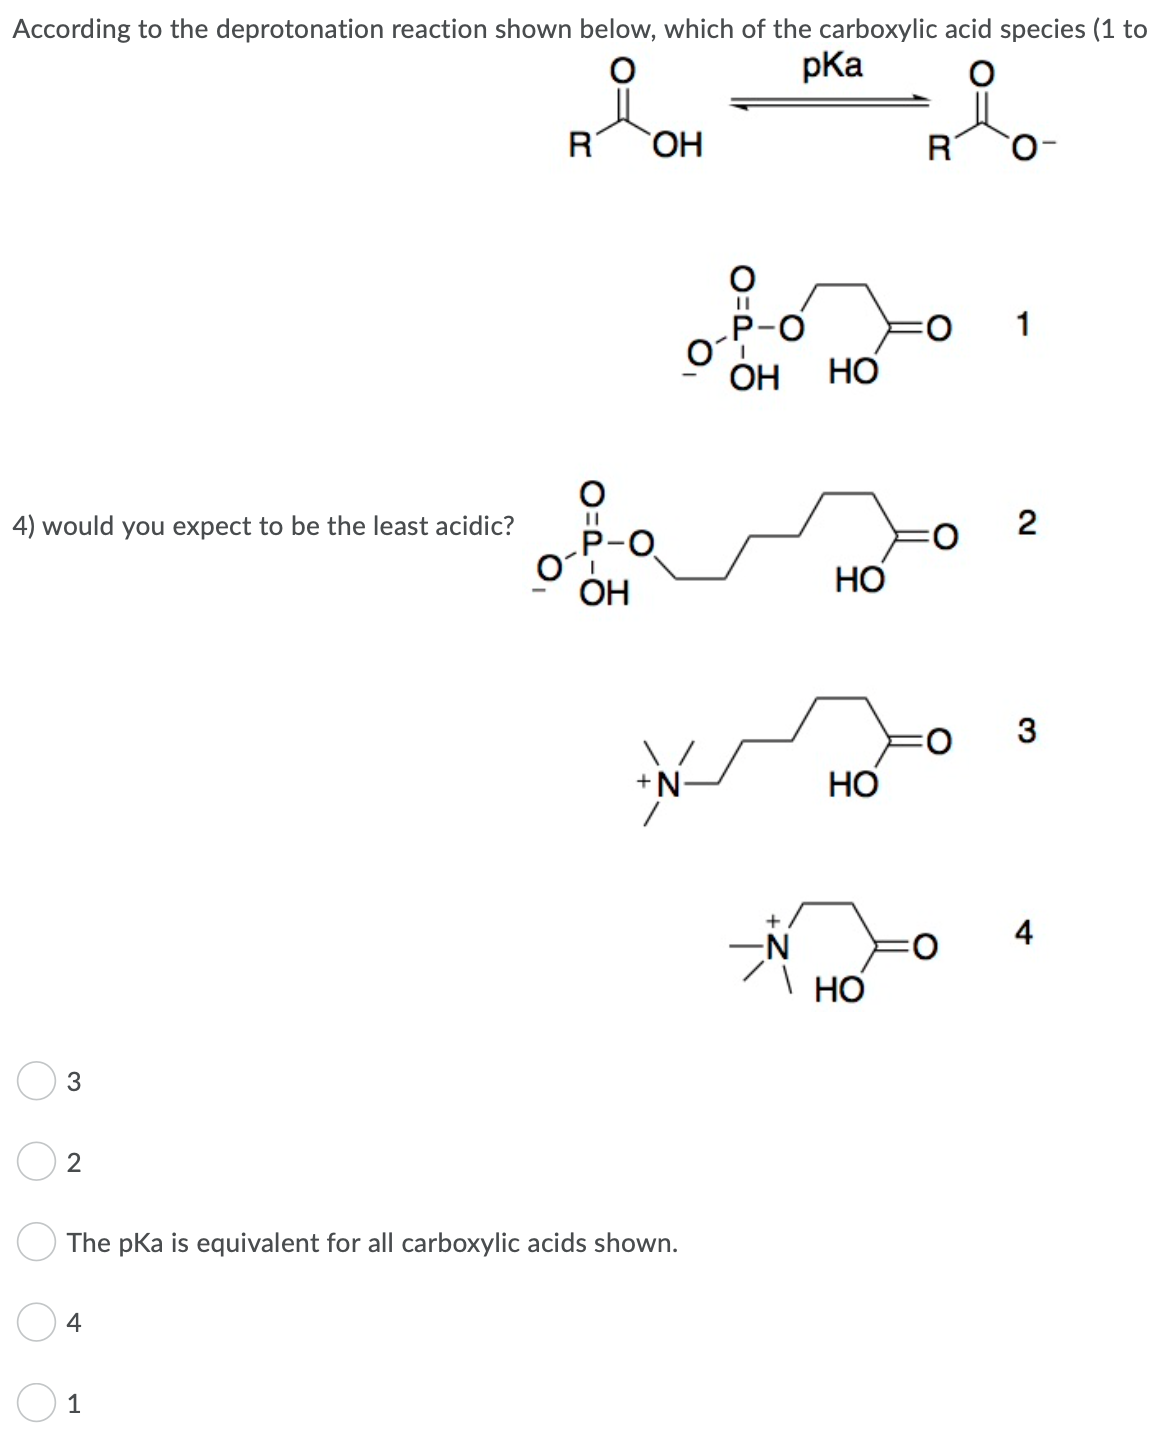 According to the deprotonation reaction shown below, which of the carboxylic acid species (1 to
pKa
HO,
R
1
P-O
НО
ОН
4) would you expect to be the least acidic?
P-O
ОН
HO
+N-
НО
4
НО
2
The pKa is equivalent for all carboxylic acids shown.
4
1
2.
